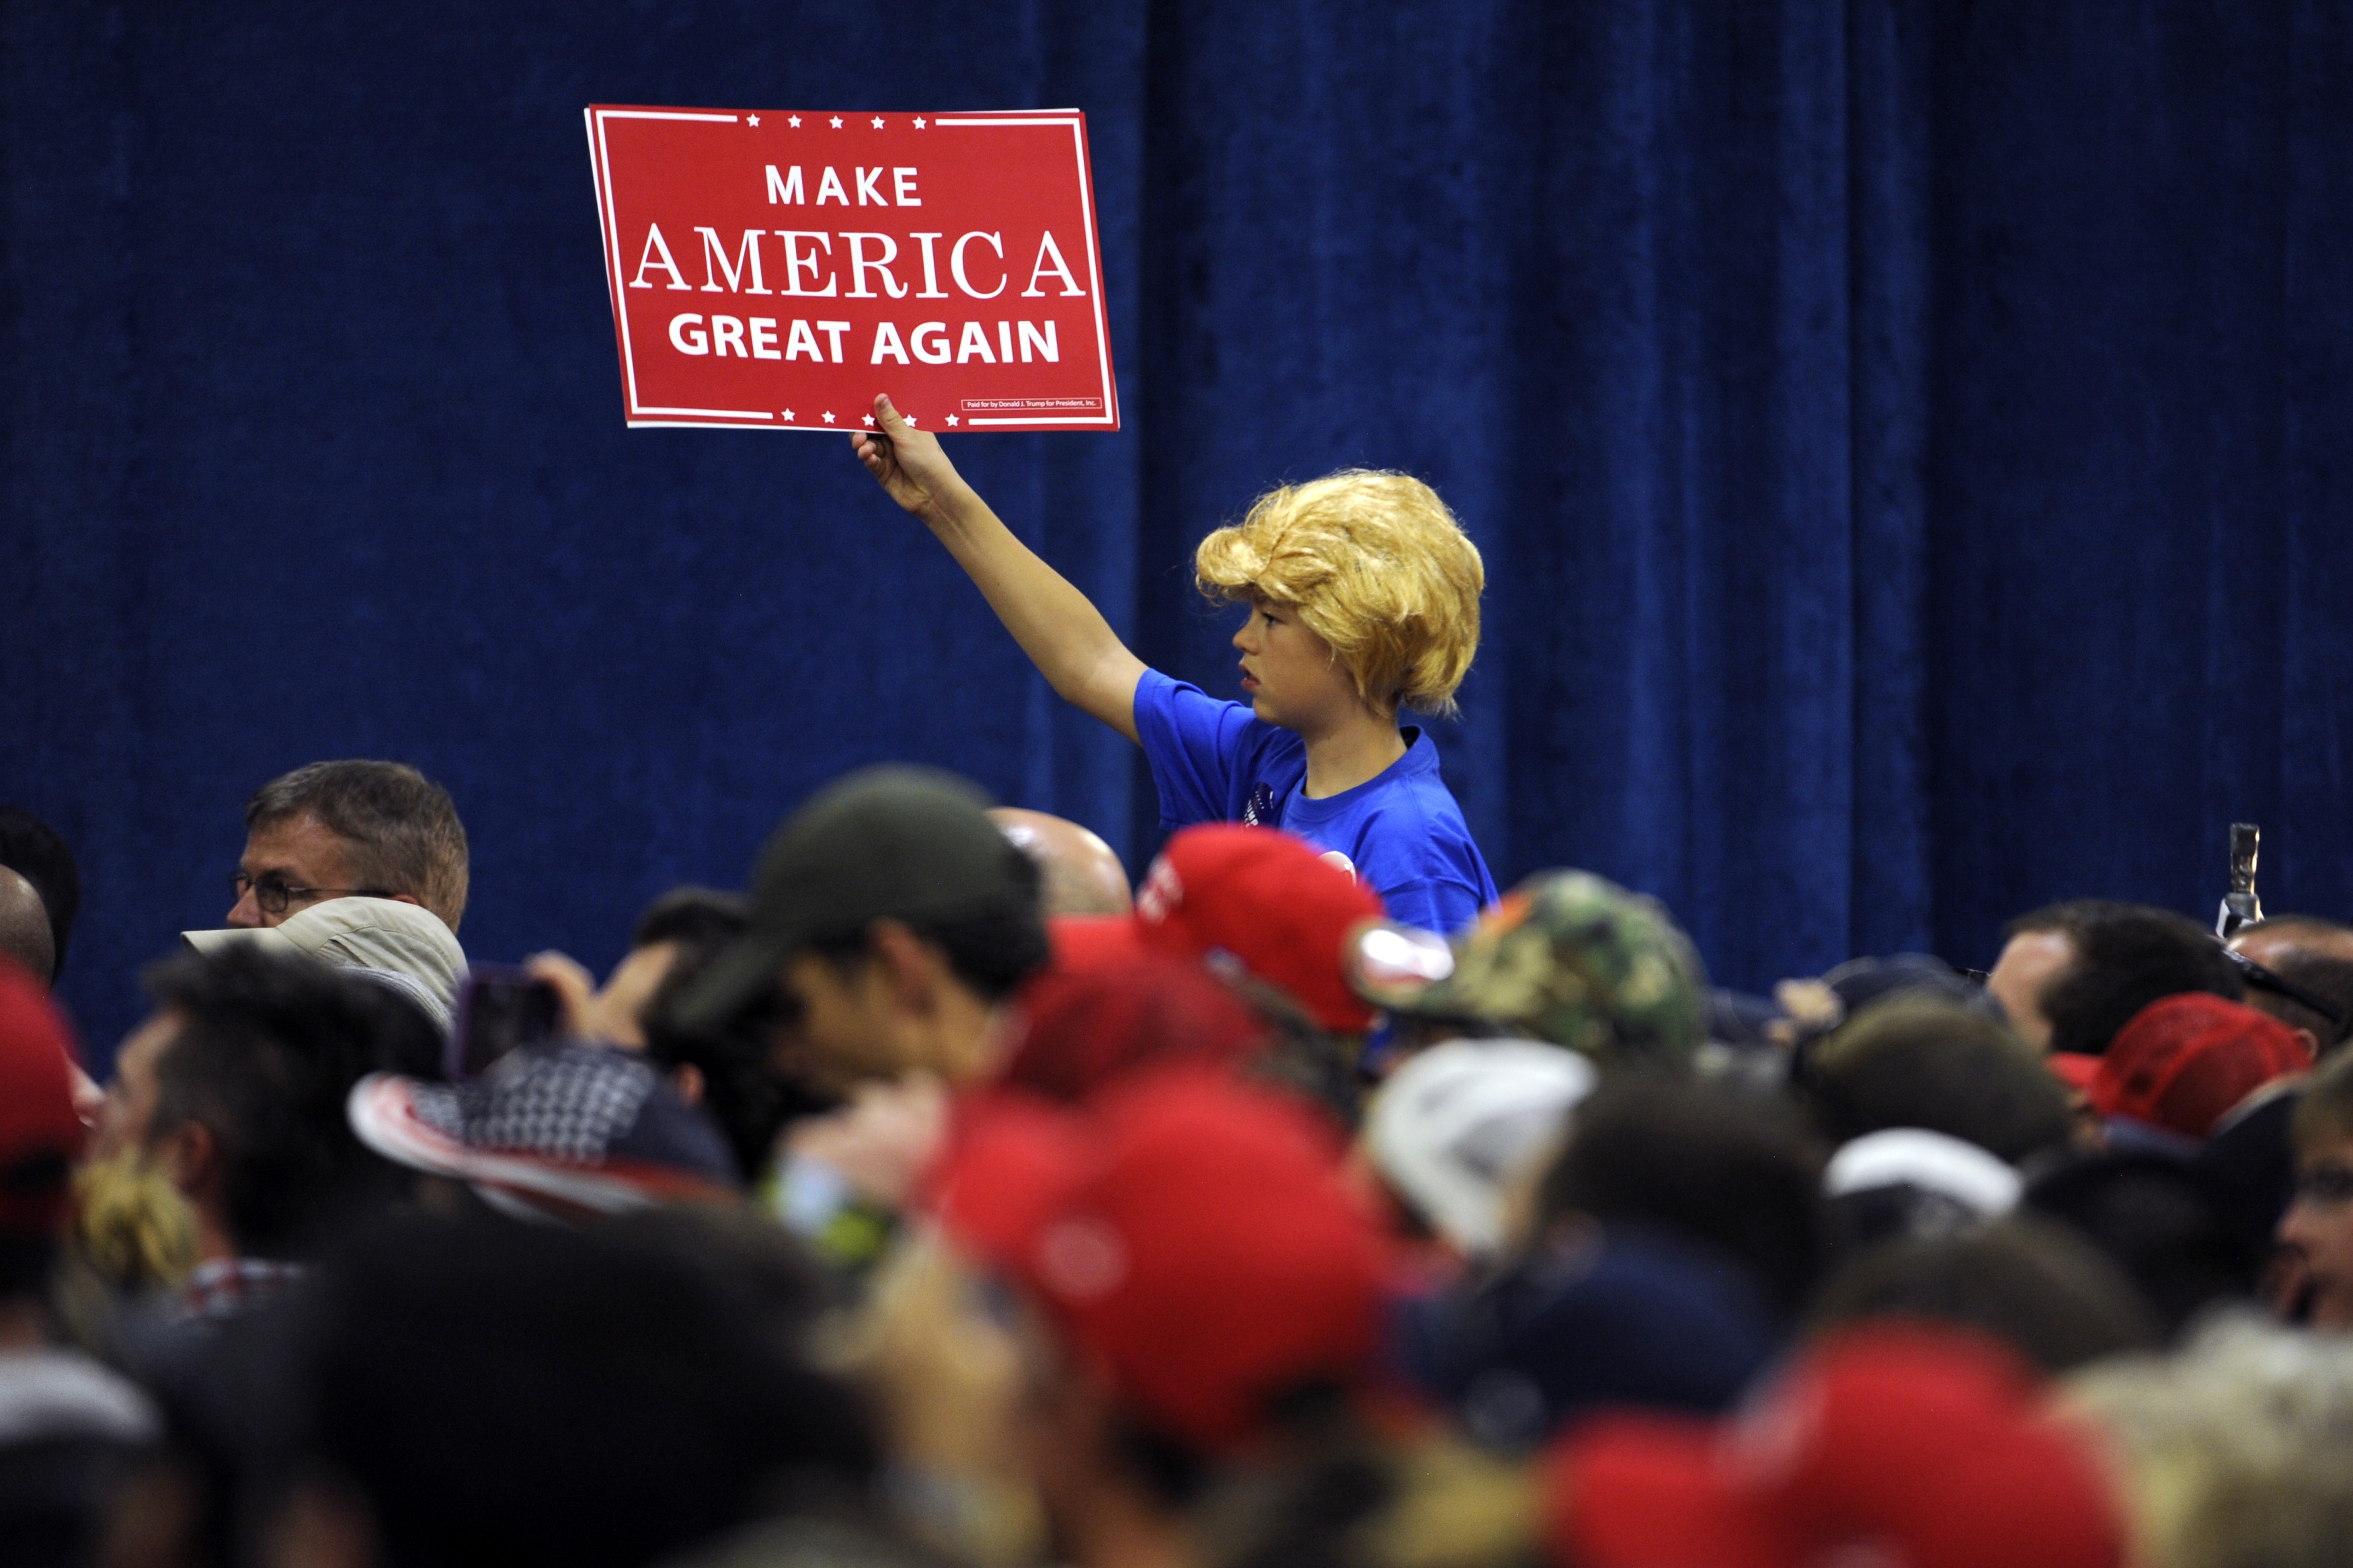 A young boy wearing a Donald Trump wig holds up a campaign sign during Republican presidential nominee Donald Trump's campaign rally at the Bank of Colorado Arena on the campus of University of Northern Colorado in Greeley, Colorado on October 30, 2016. (Jason Connolly&mdash;AFP/Getty Images)